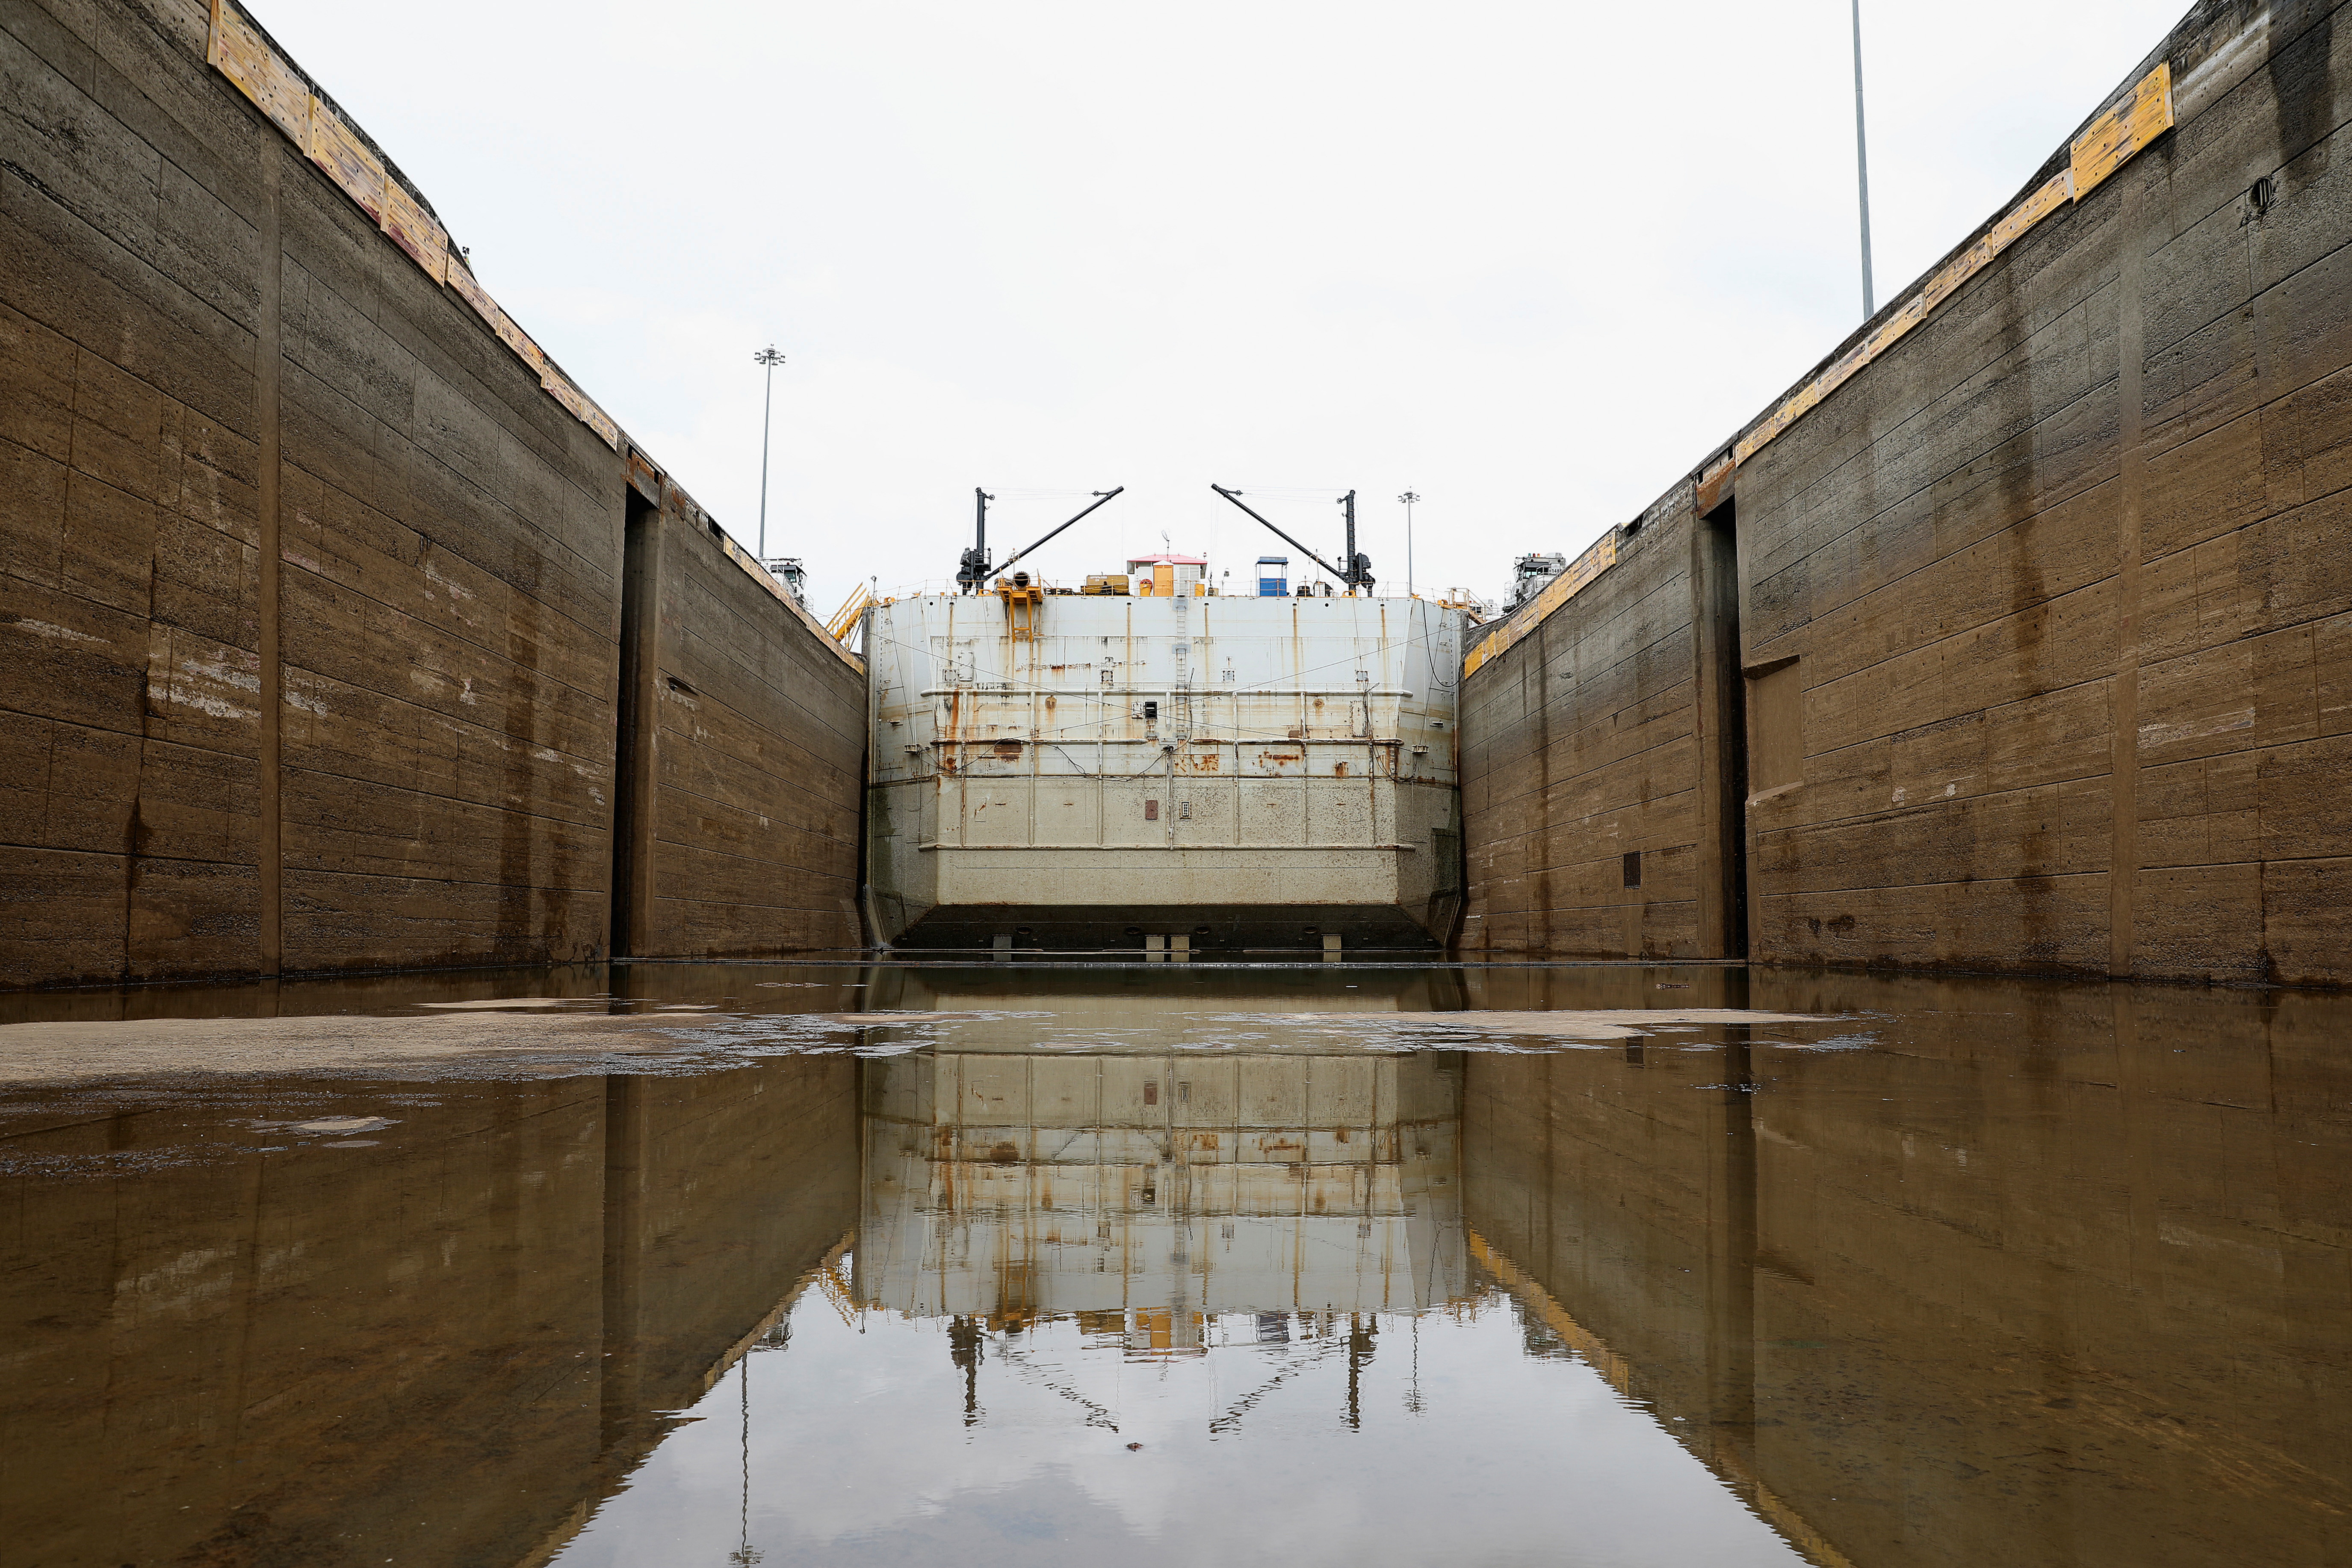 West Lane of Pedro Miguel locks under maintenance at the Panama Canal